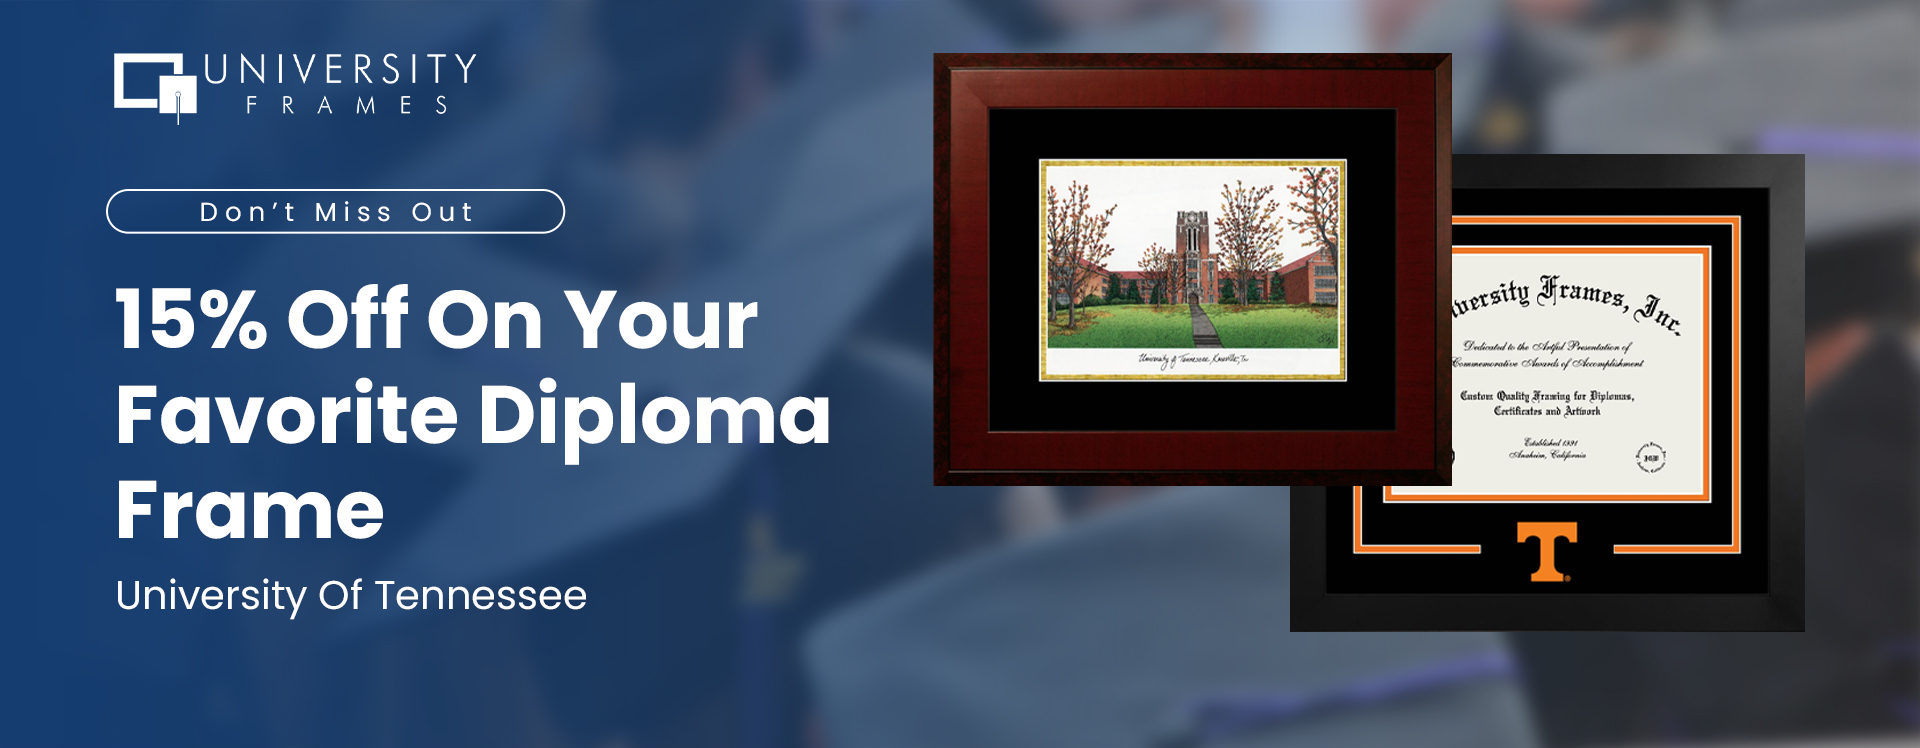 Don’t Miss Out On 15% Off On Your Favorite University Of Tennessee Diploma Frames